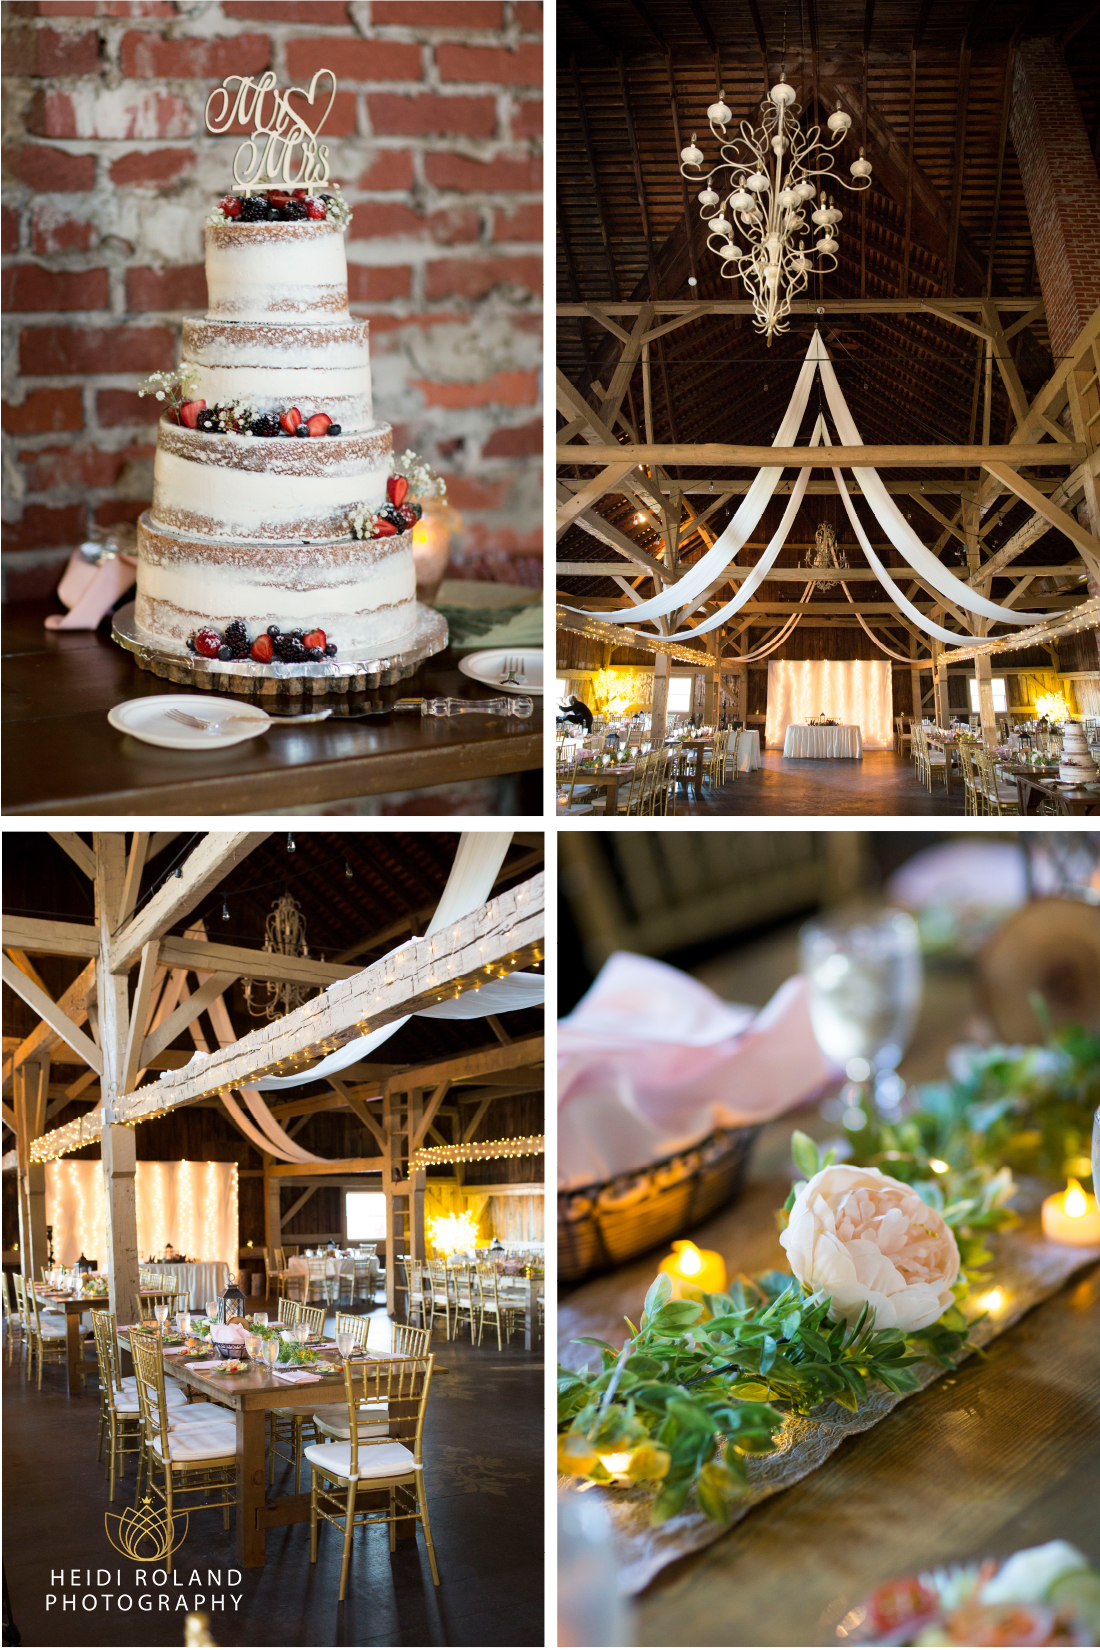 wedding cake and barn reception details PA